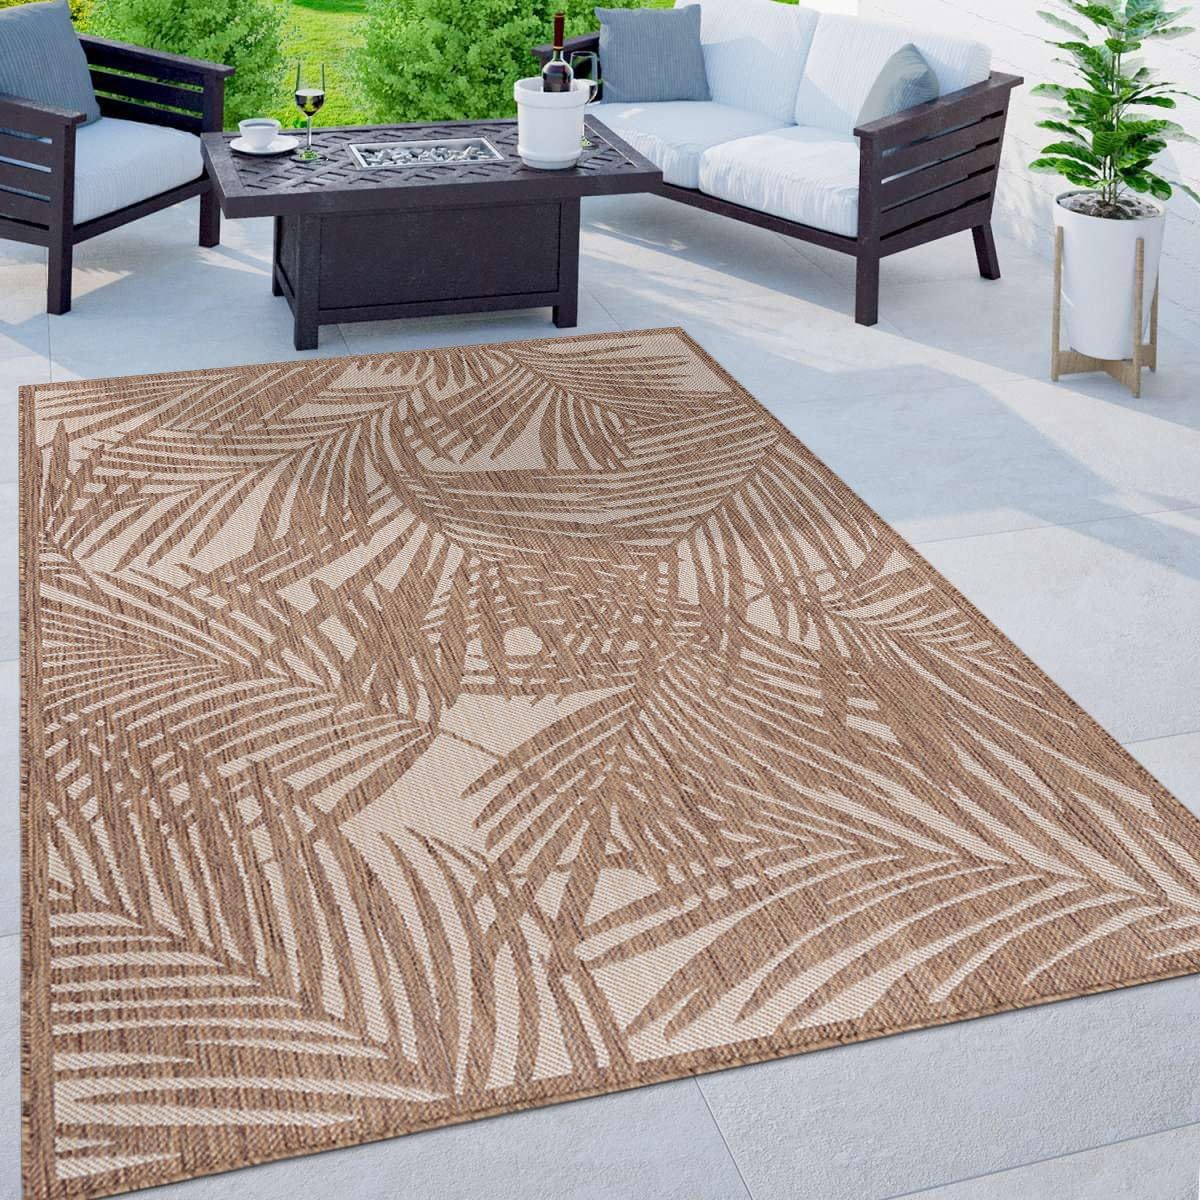 Rugshop Contemporary Palm Leaf Textured Flat Weave Easy Cleaning Outdoor Rugs for Deck,Patio,Back... | Amazon (US)